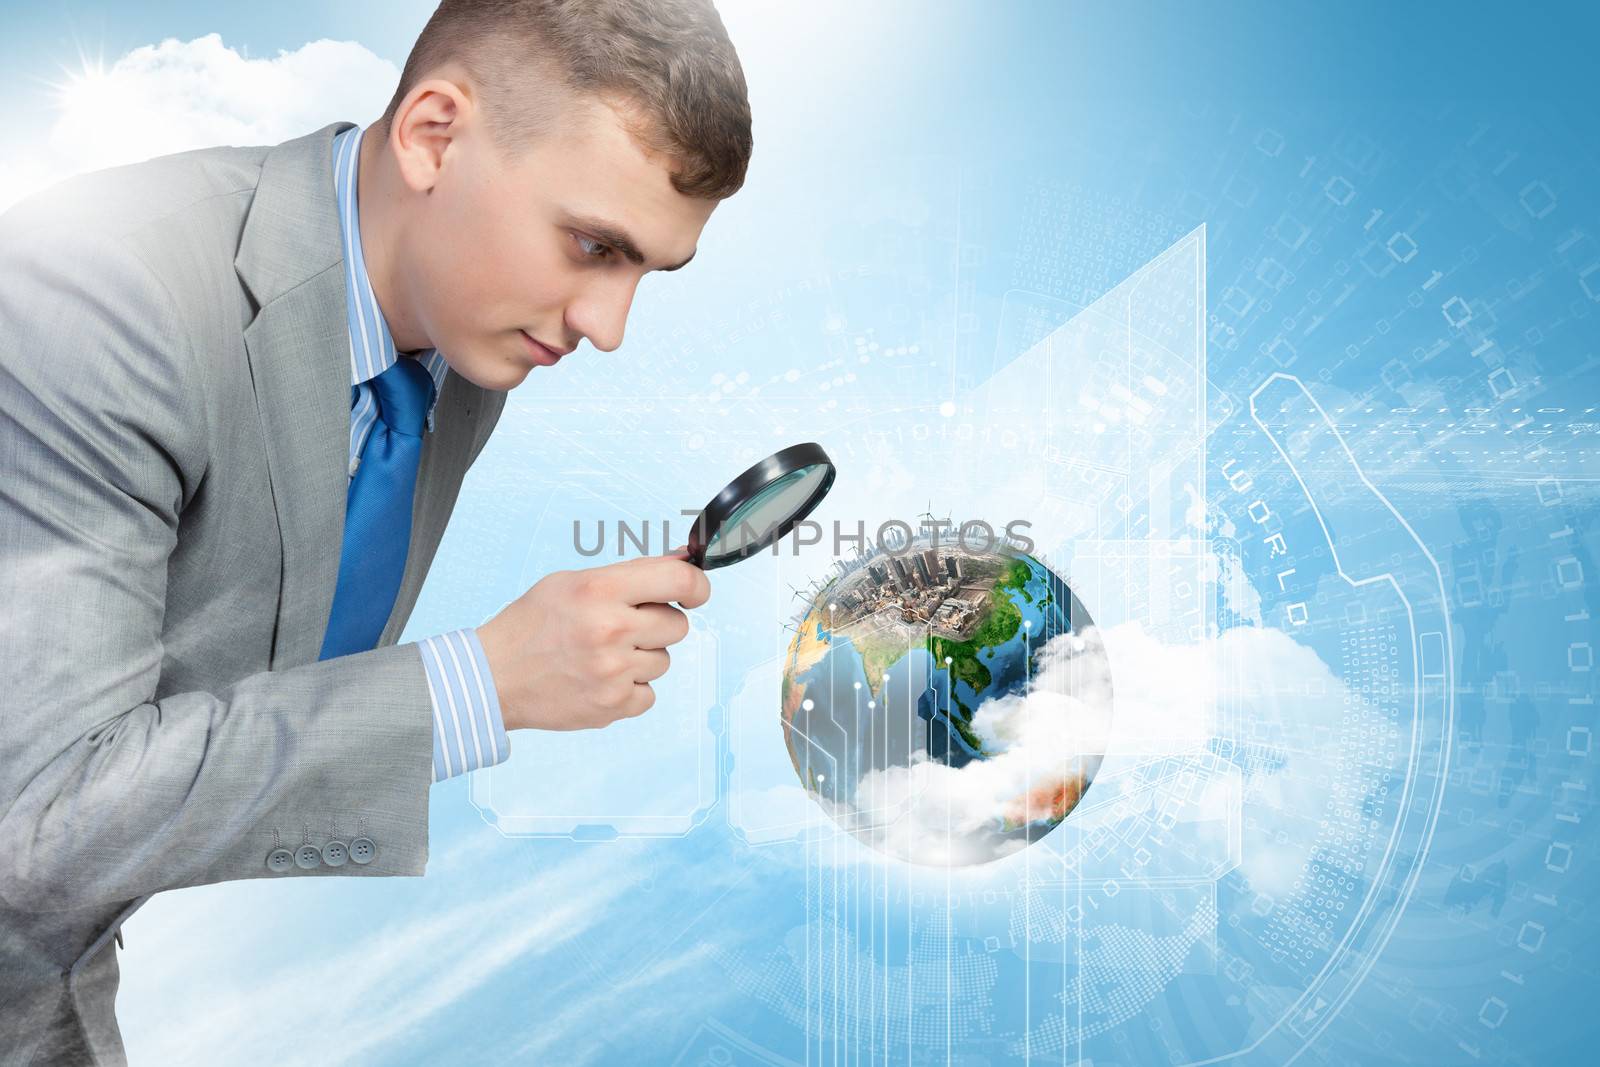 Image of businessman examining objects with magnifier. Elements of this image are furnished by NASA